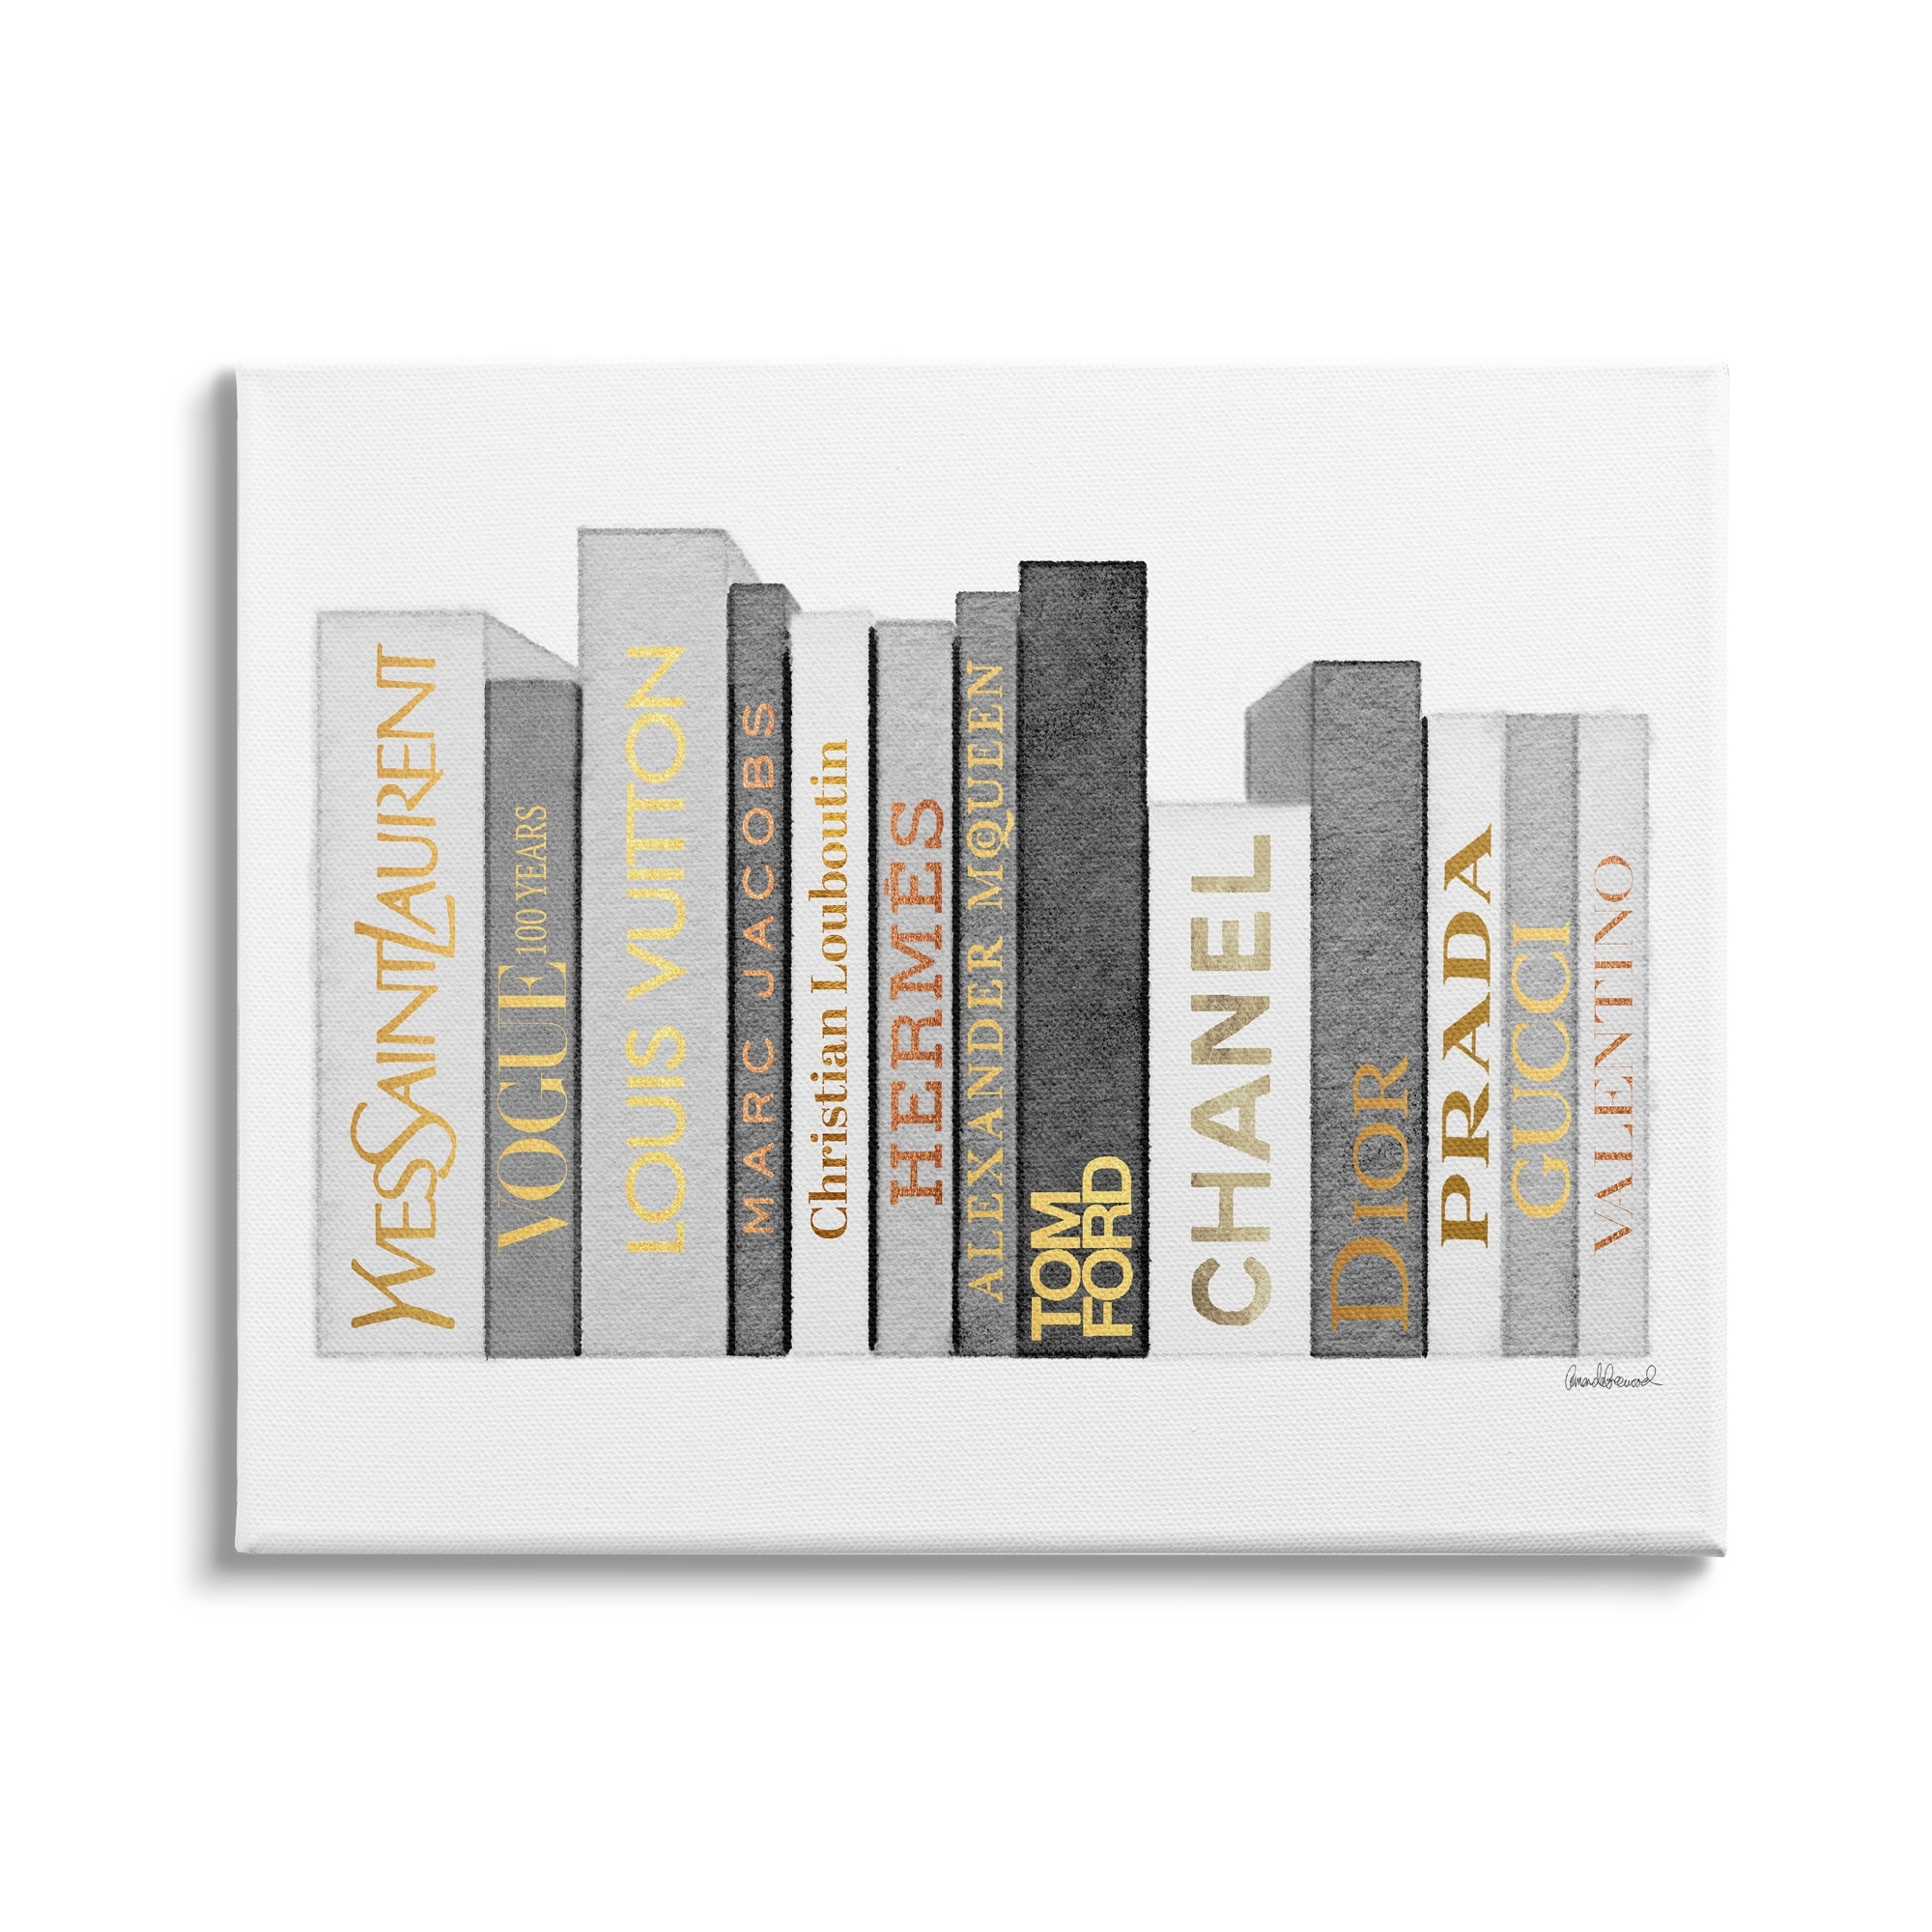 Stupell Horizontal Fashion Book Stack Glam Grey Gold White Canvas Wall Art  - Bed Bath & Beyond - 34847909